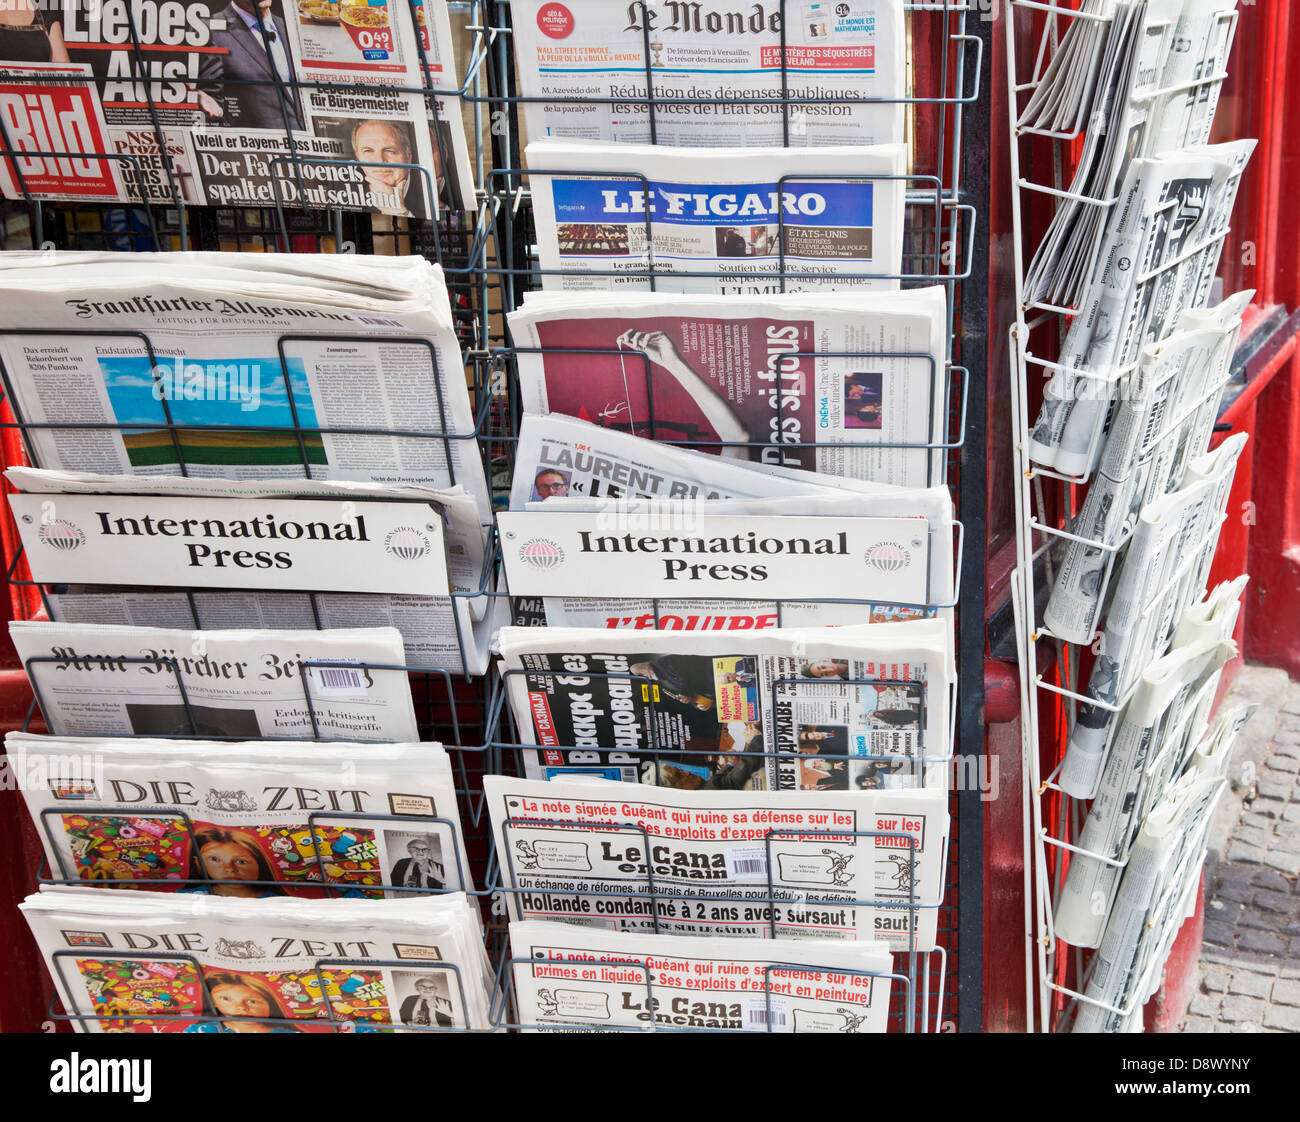 world press and international newspapers and newspapers uk for sale in a newsagents in a uk city centre Stock Photo